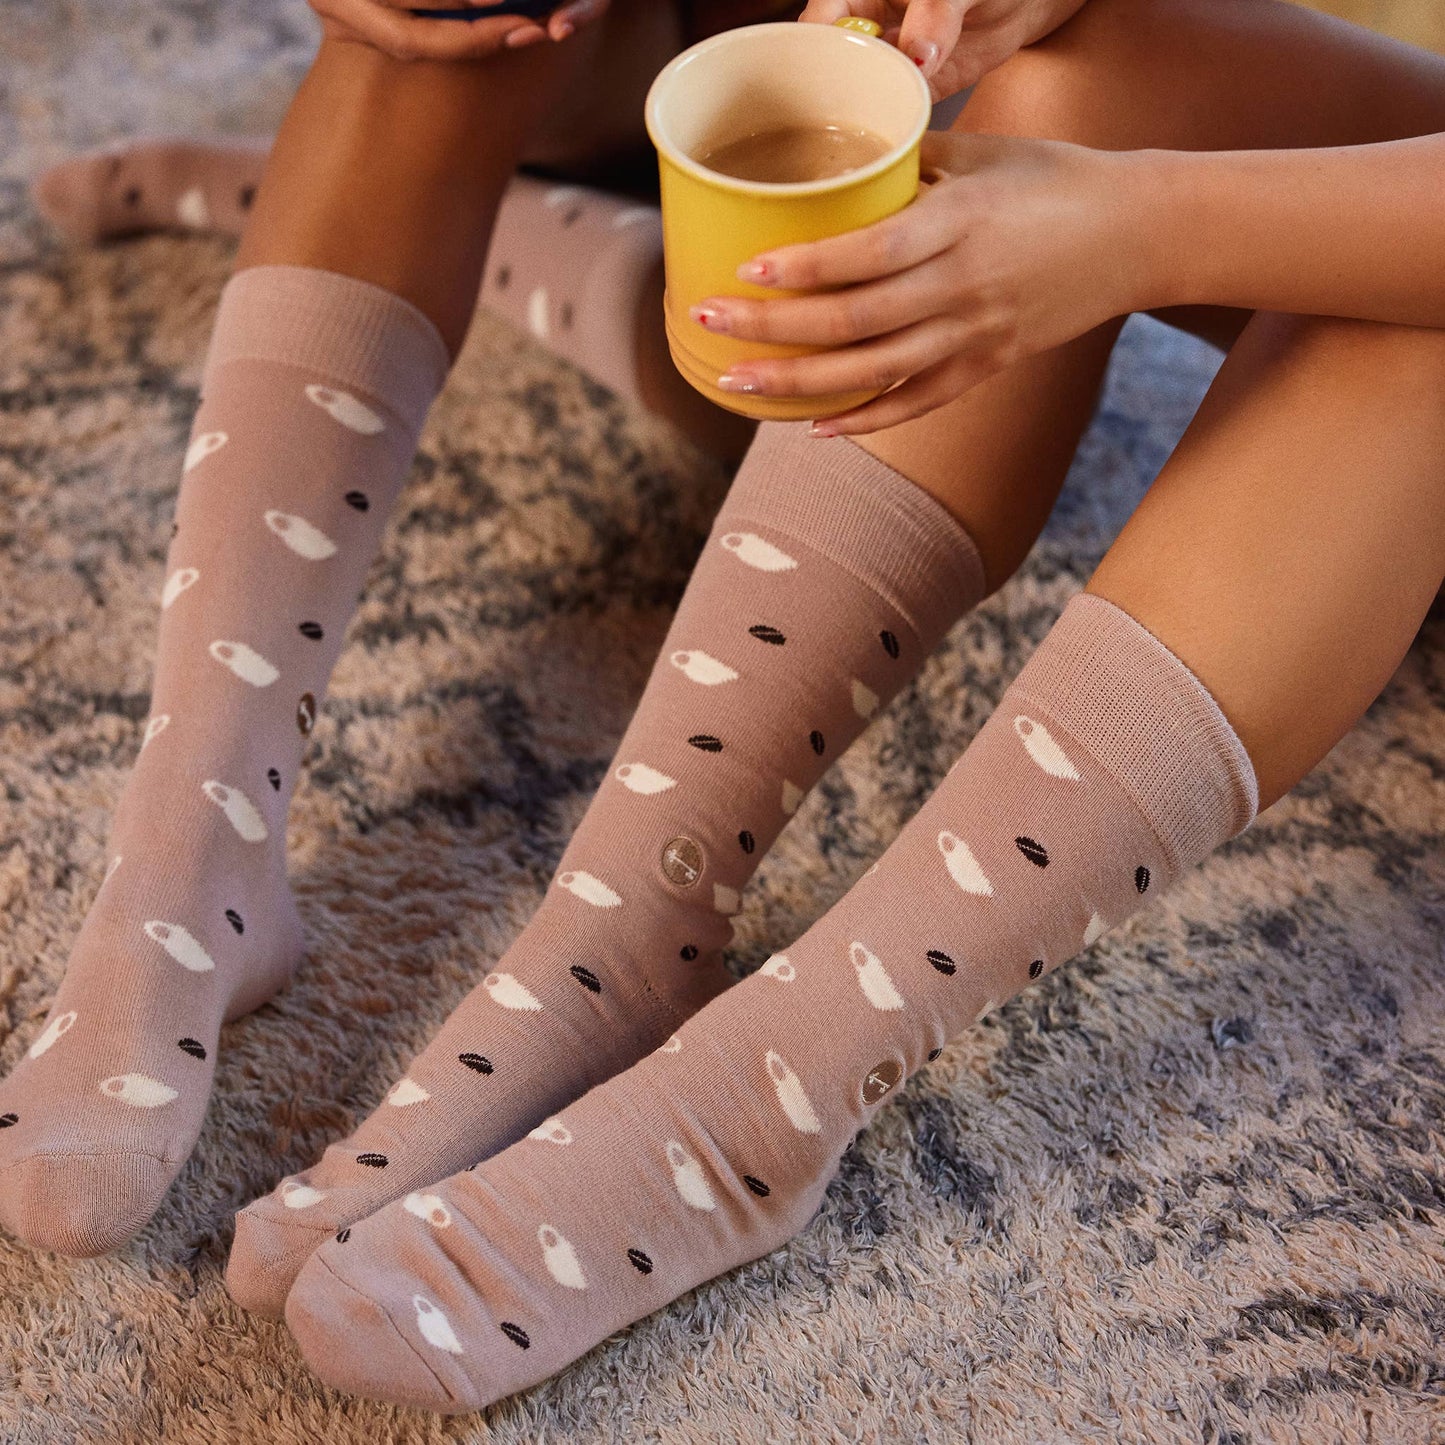 Socks that Build Homes (Coffee Cups): Small